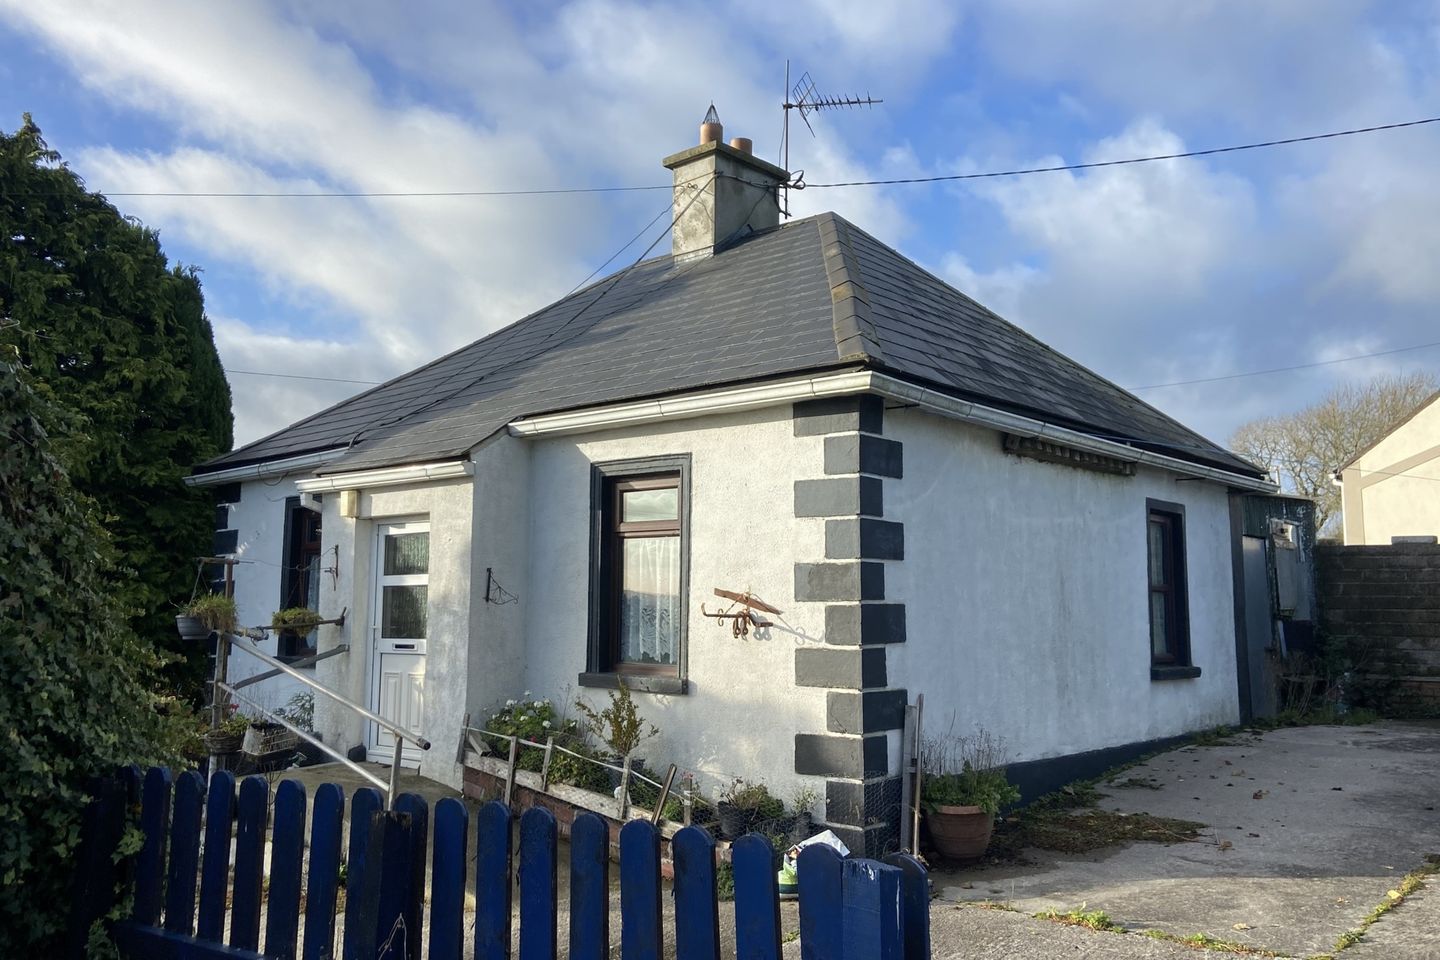 Clashduff, Coolbrook, Ballingarry, Thurles, Co. Tipperary